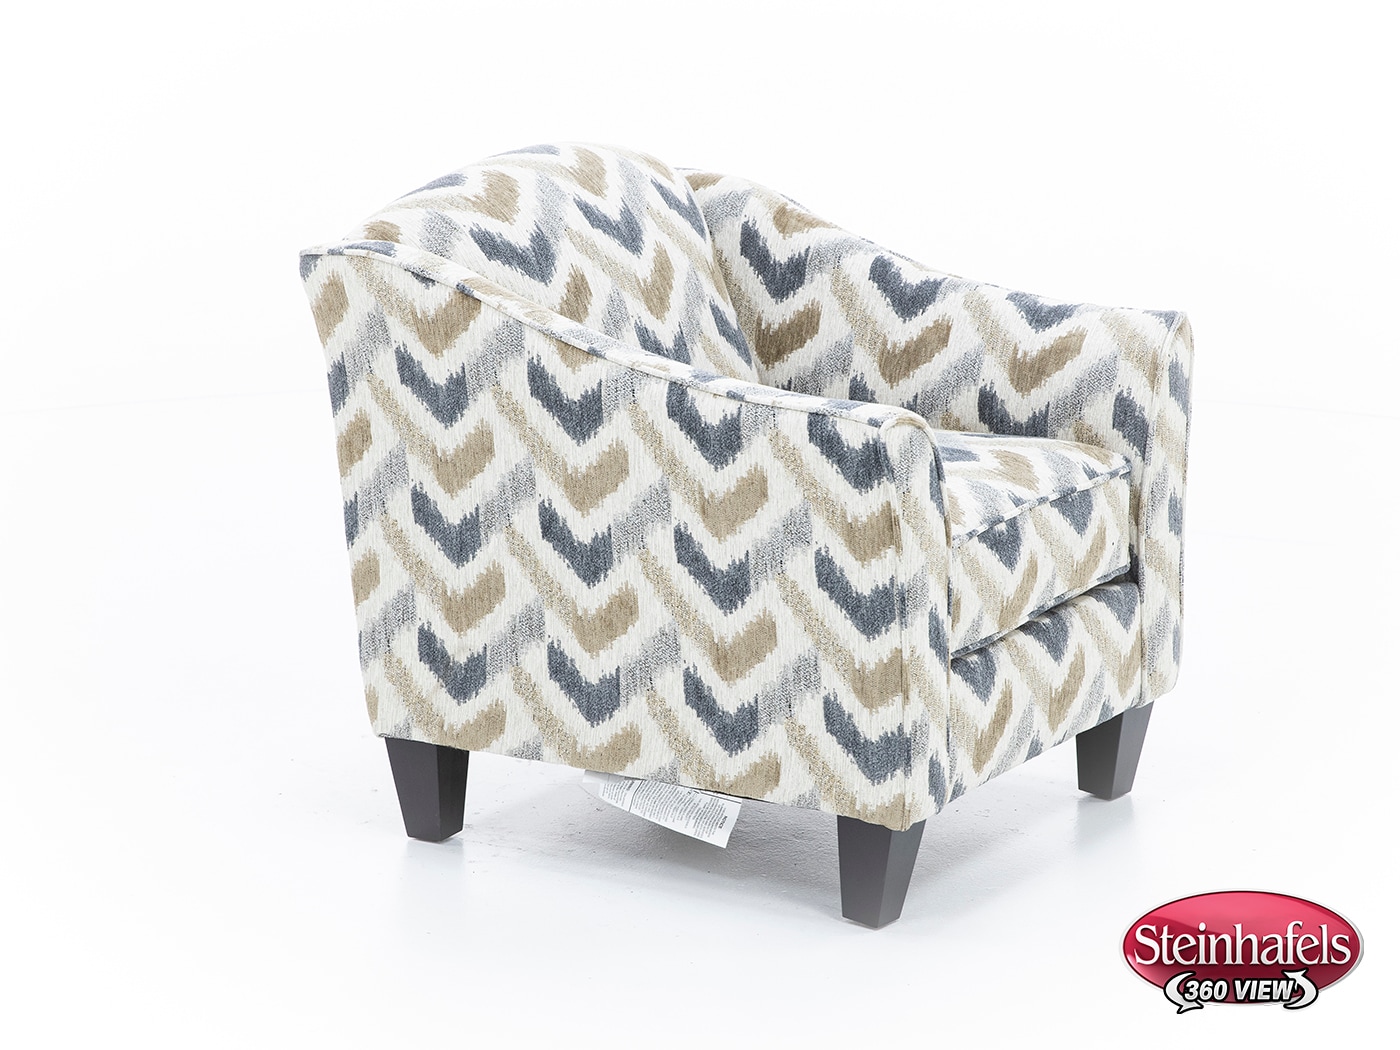 wash grey accent chair  image z  